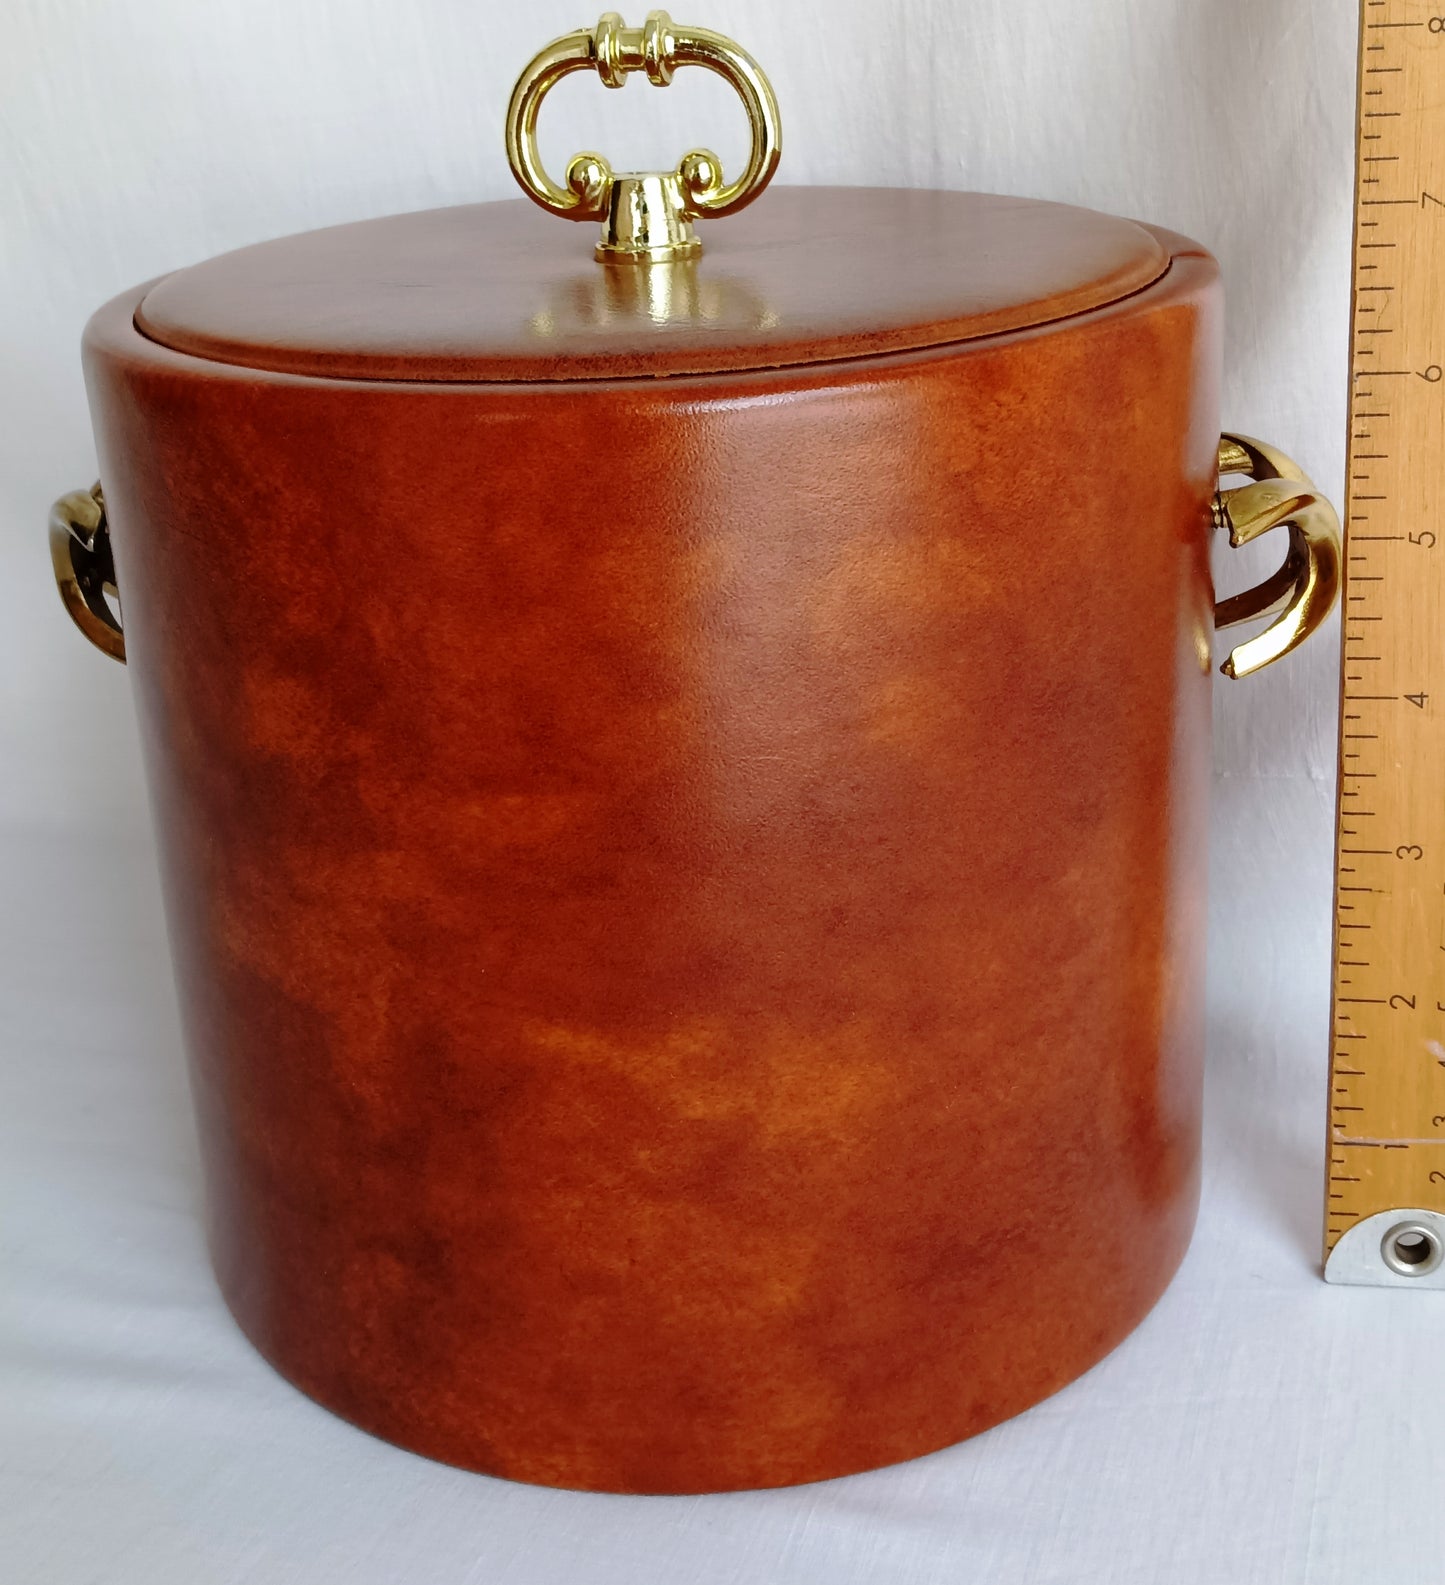 Vintage Kraftware Ice Bucket Beer Cooler Cognac Color Faux Leather Brass Plated Handles Knob Stainless Steel Tongs Retro Barware Man Cave